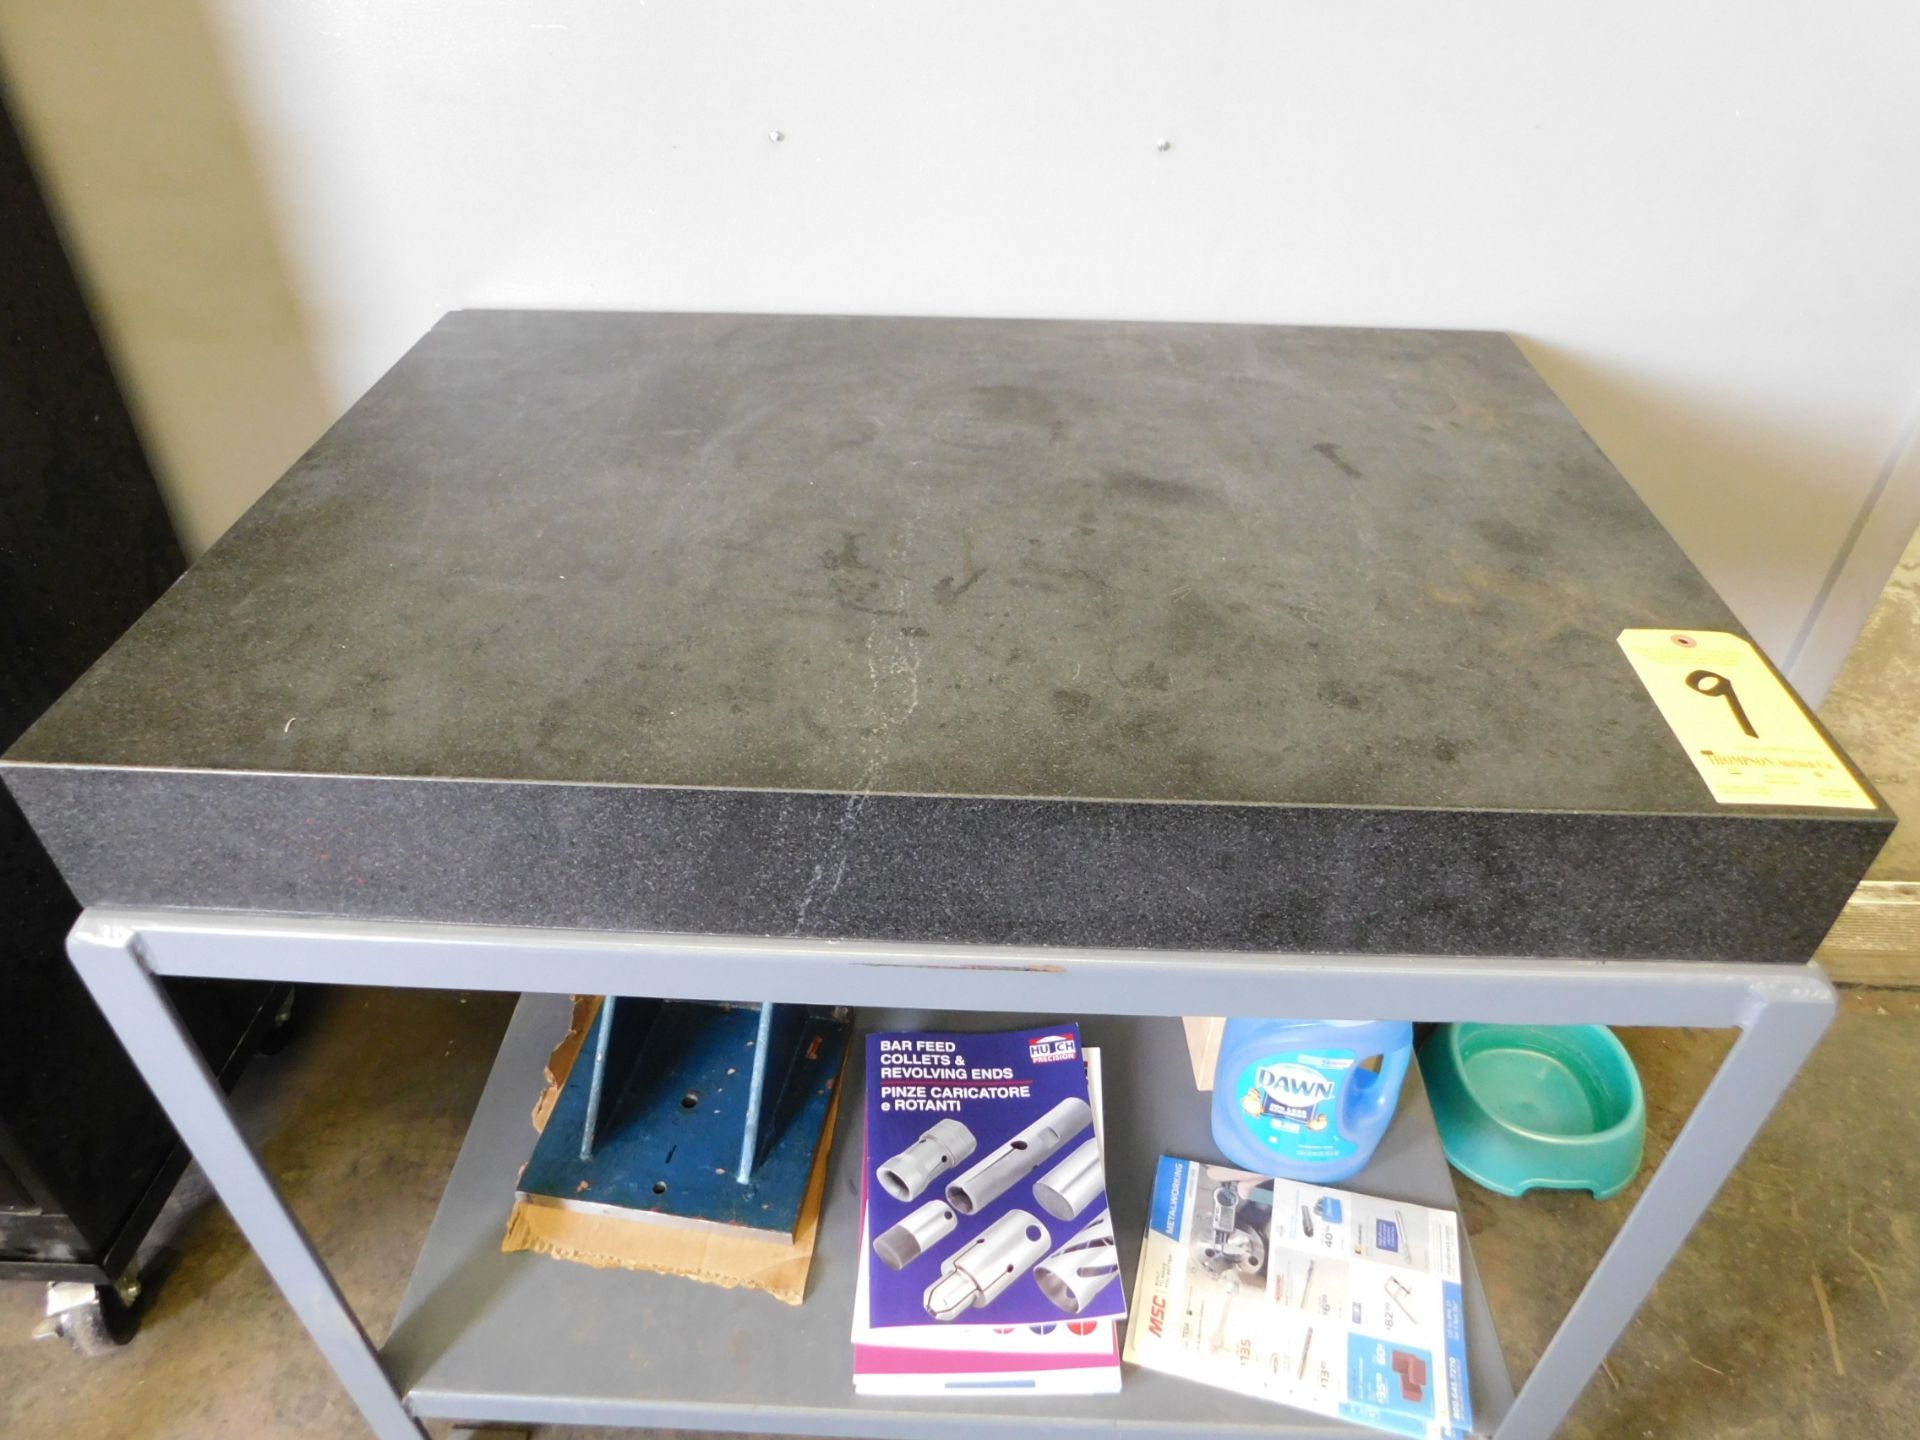 Granite Surface Plate, 24" x 36" x 4" NO STAND, Lot Location: 301 Poor Dr., Warsaw, IN, 46580